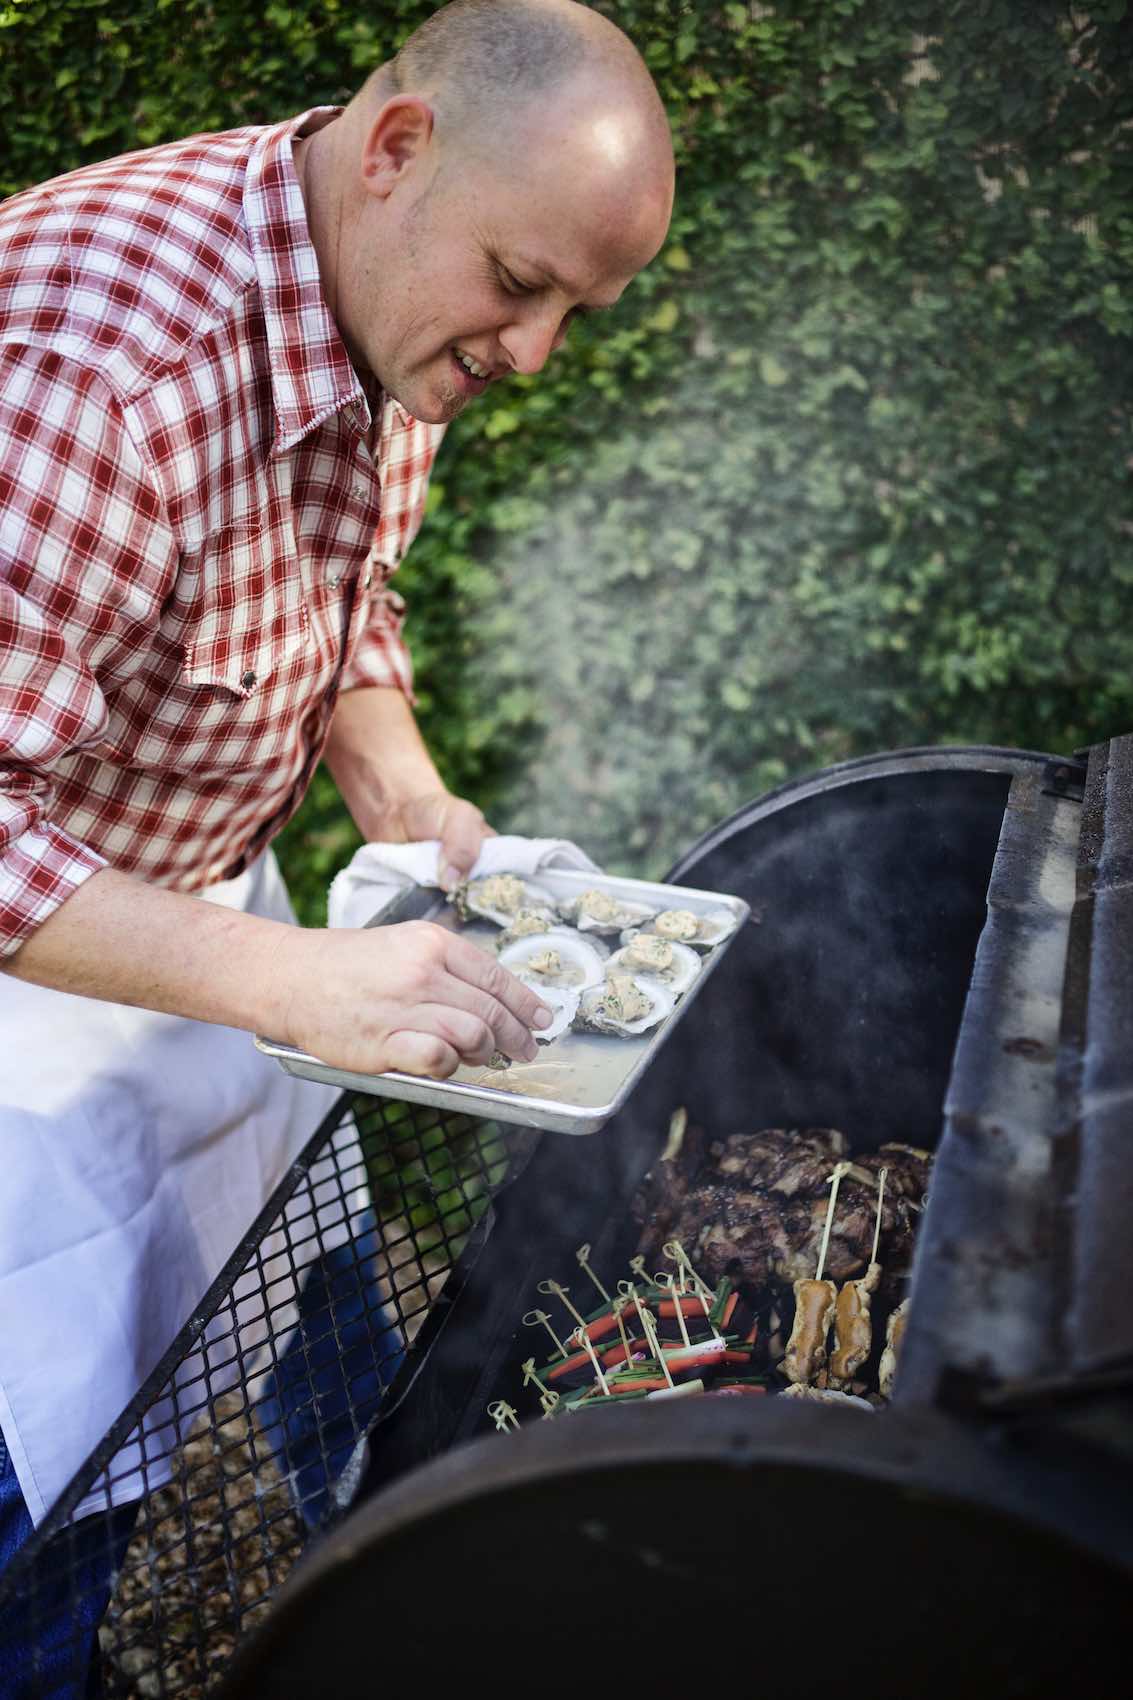 Jody Horton Photography - Chef preparing oysters on outdoor grill.